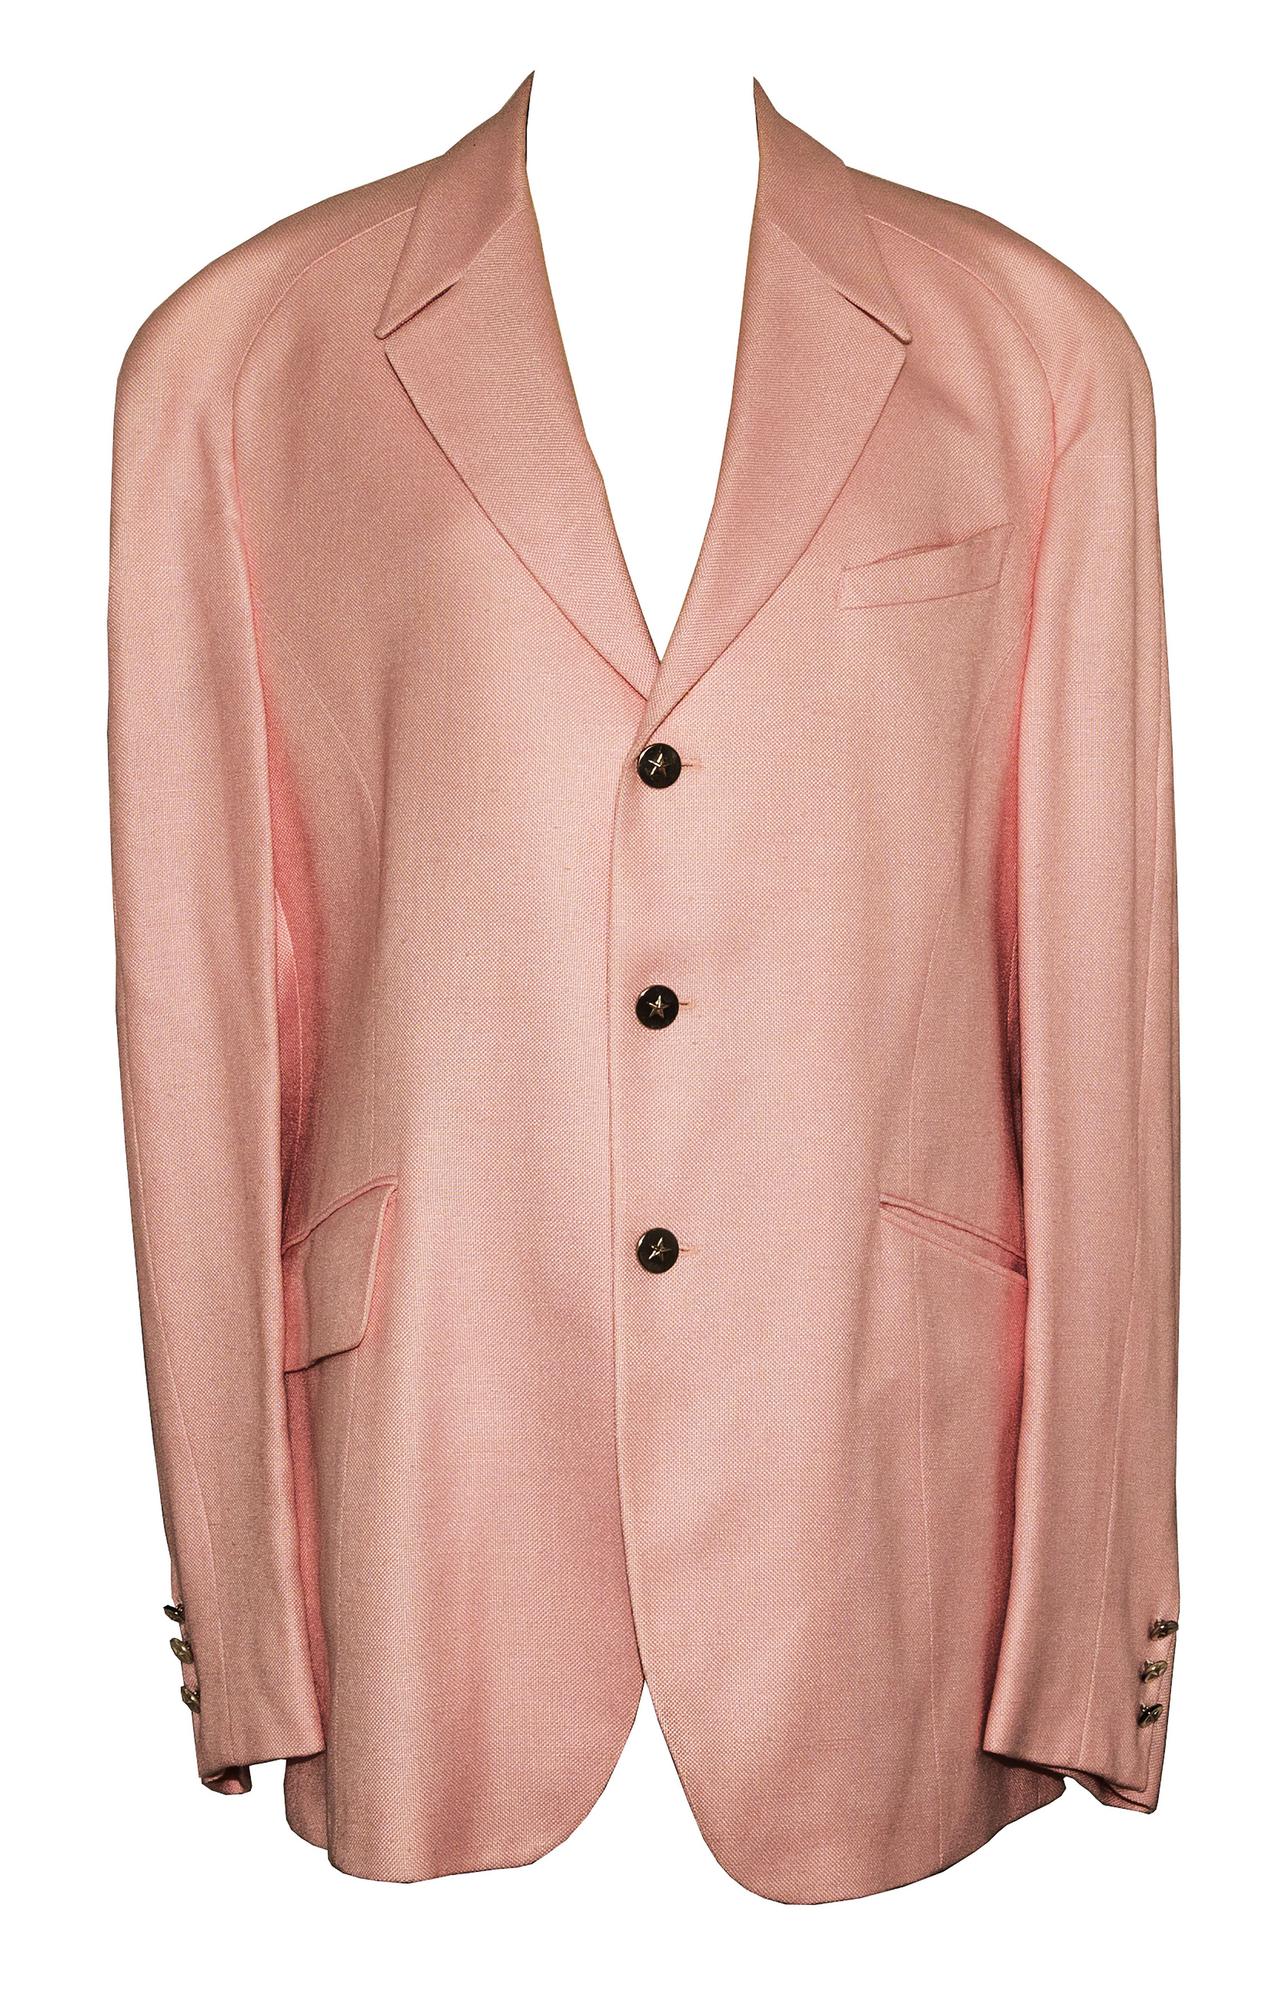 Thierry Mugler CLASSIC 3 BUTTON JACKET Description: Single-breasted...